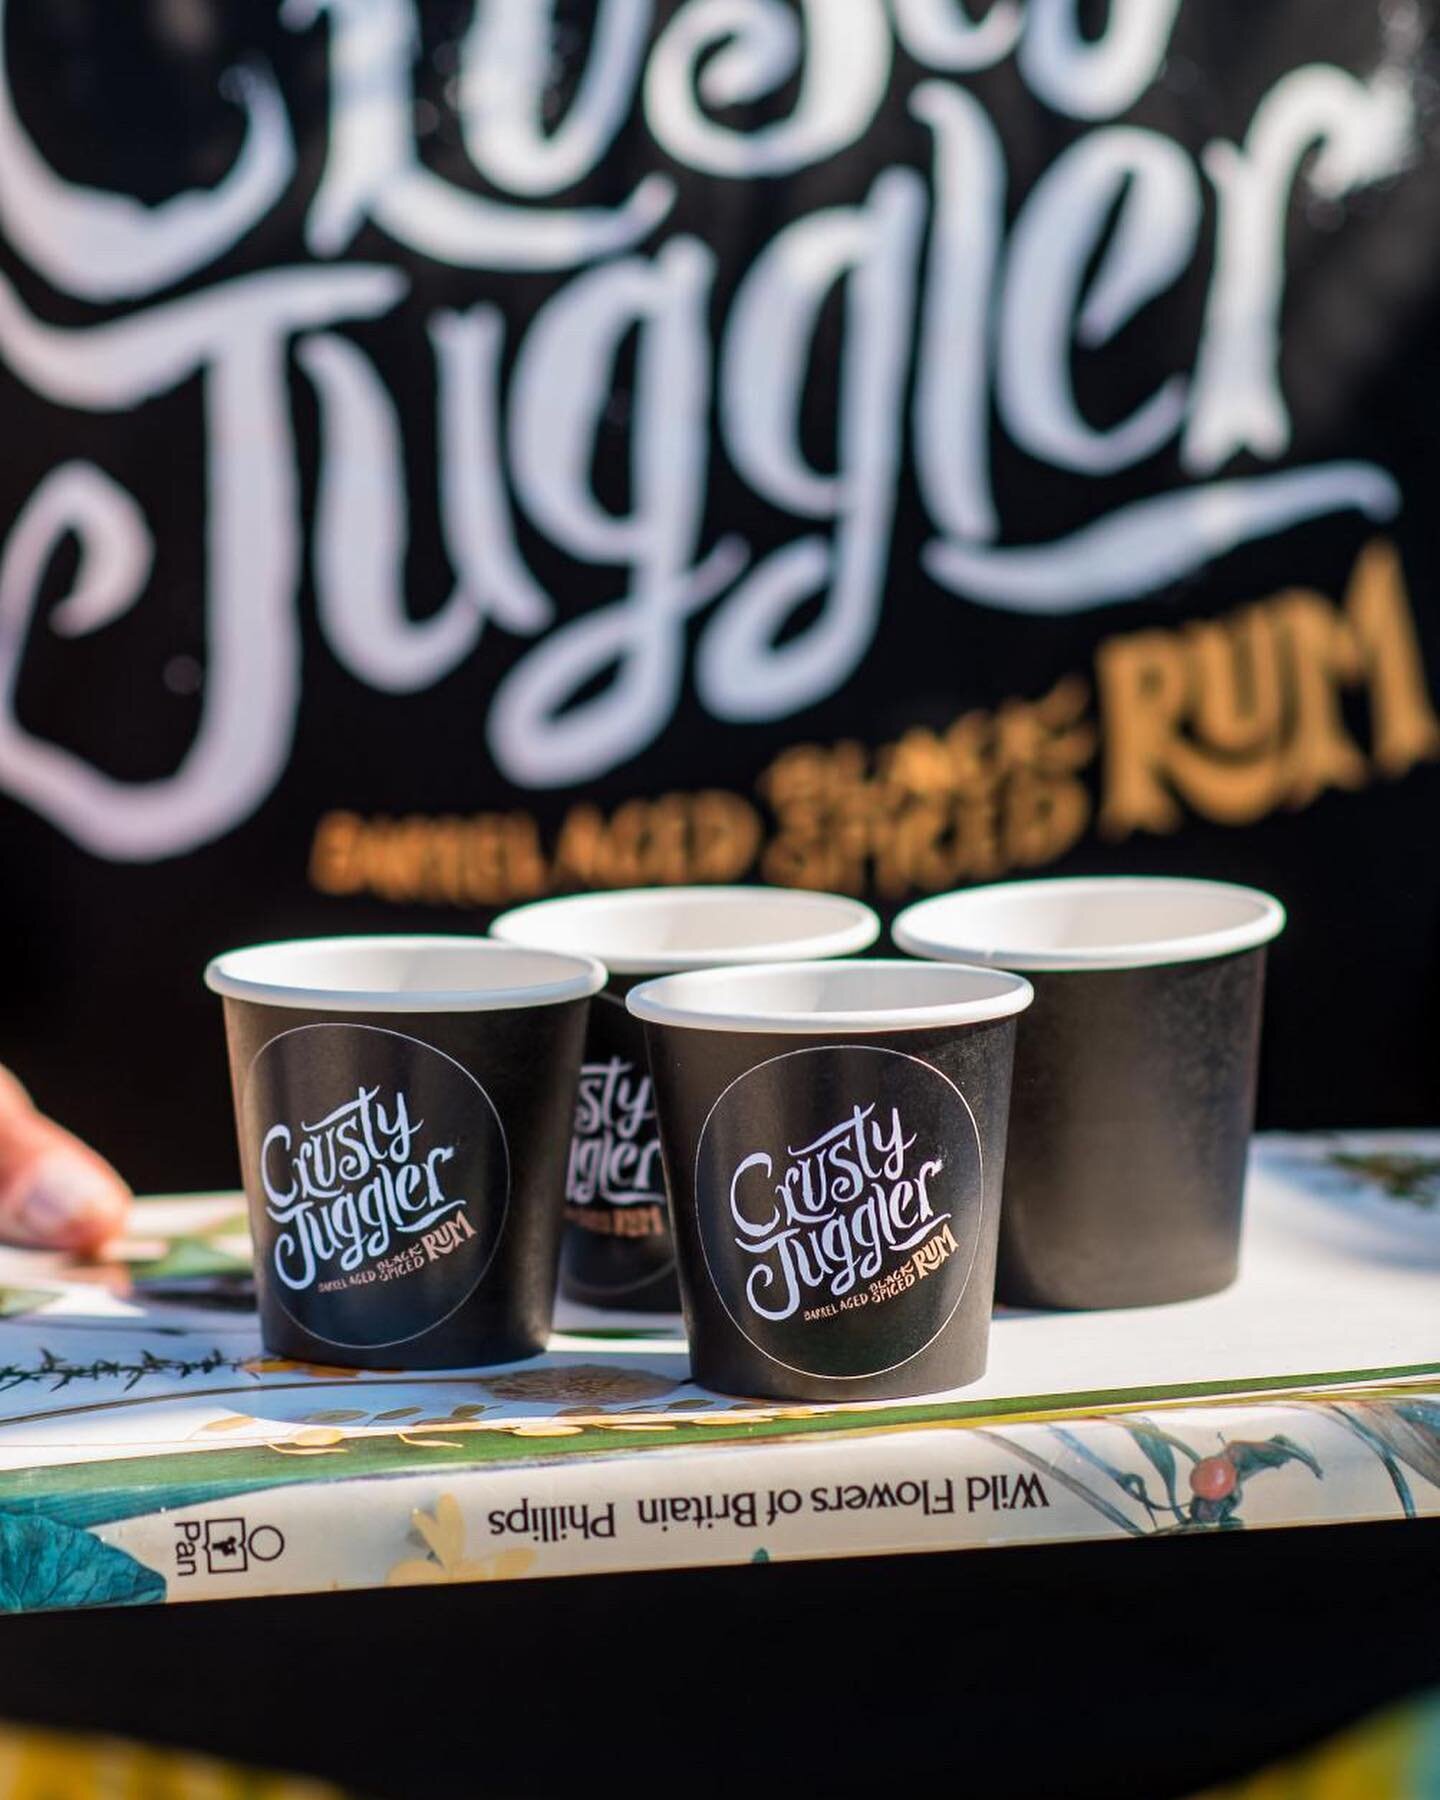 And that's a wrap! Huge thanks to everyone who came to see us @stivesfoodfest this weekend 🙌 Whether you had a Rum slushy from the Crusty Shack or bought a bottle from our trader stand, we salute you! Special mention to the Crusty Jugglers who atten